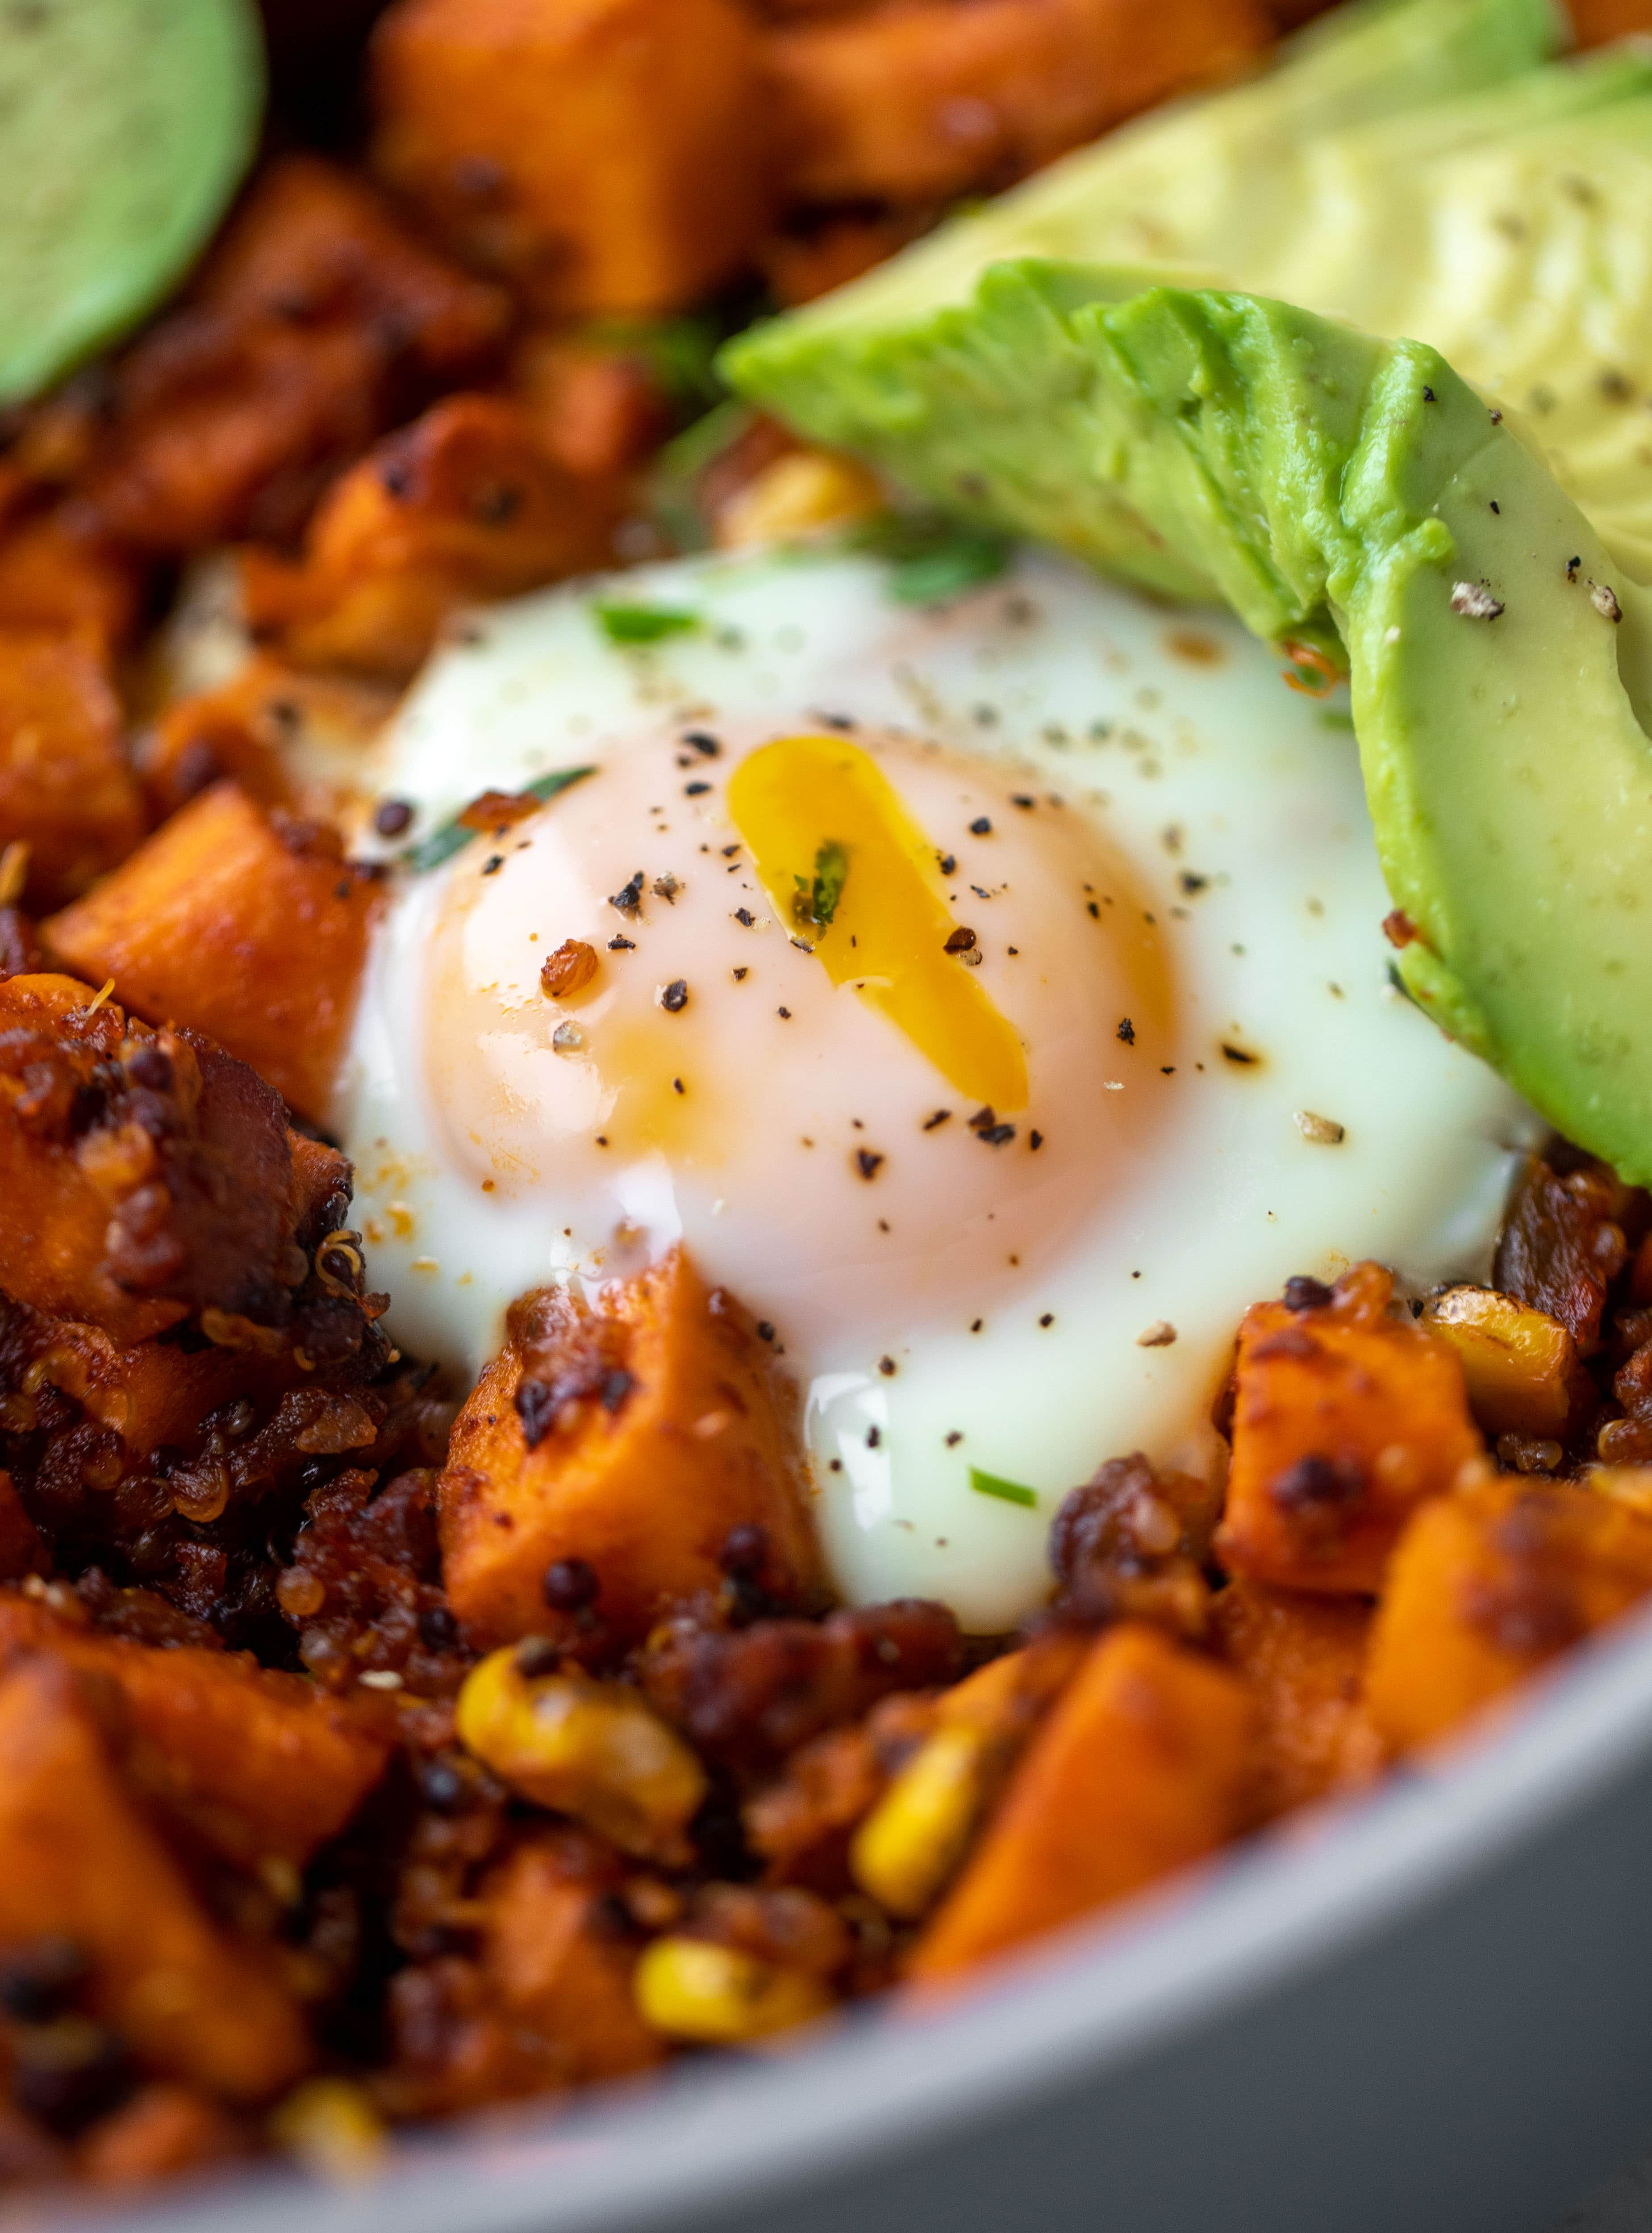 This chipotle sweet potato hash is perfect for breakfast, lunch or dinner. Bulked up with quinoa and tons of flavor, it's a great pantry weeknight meal!